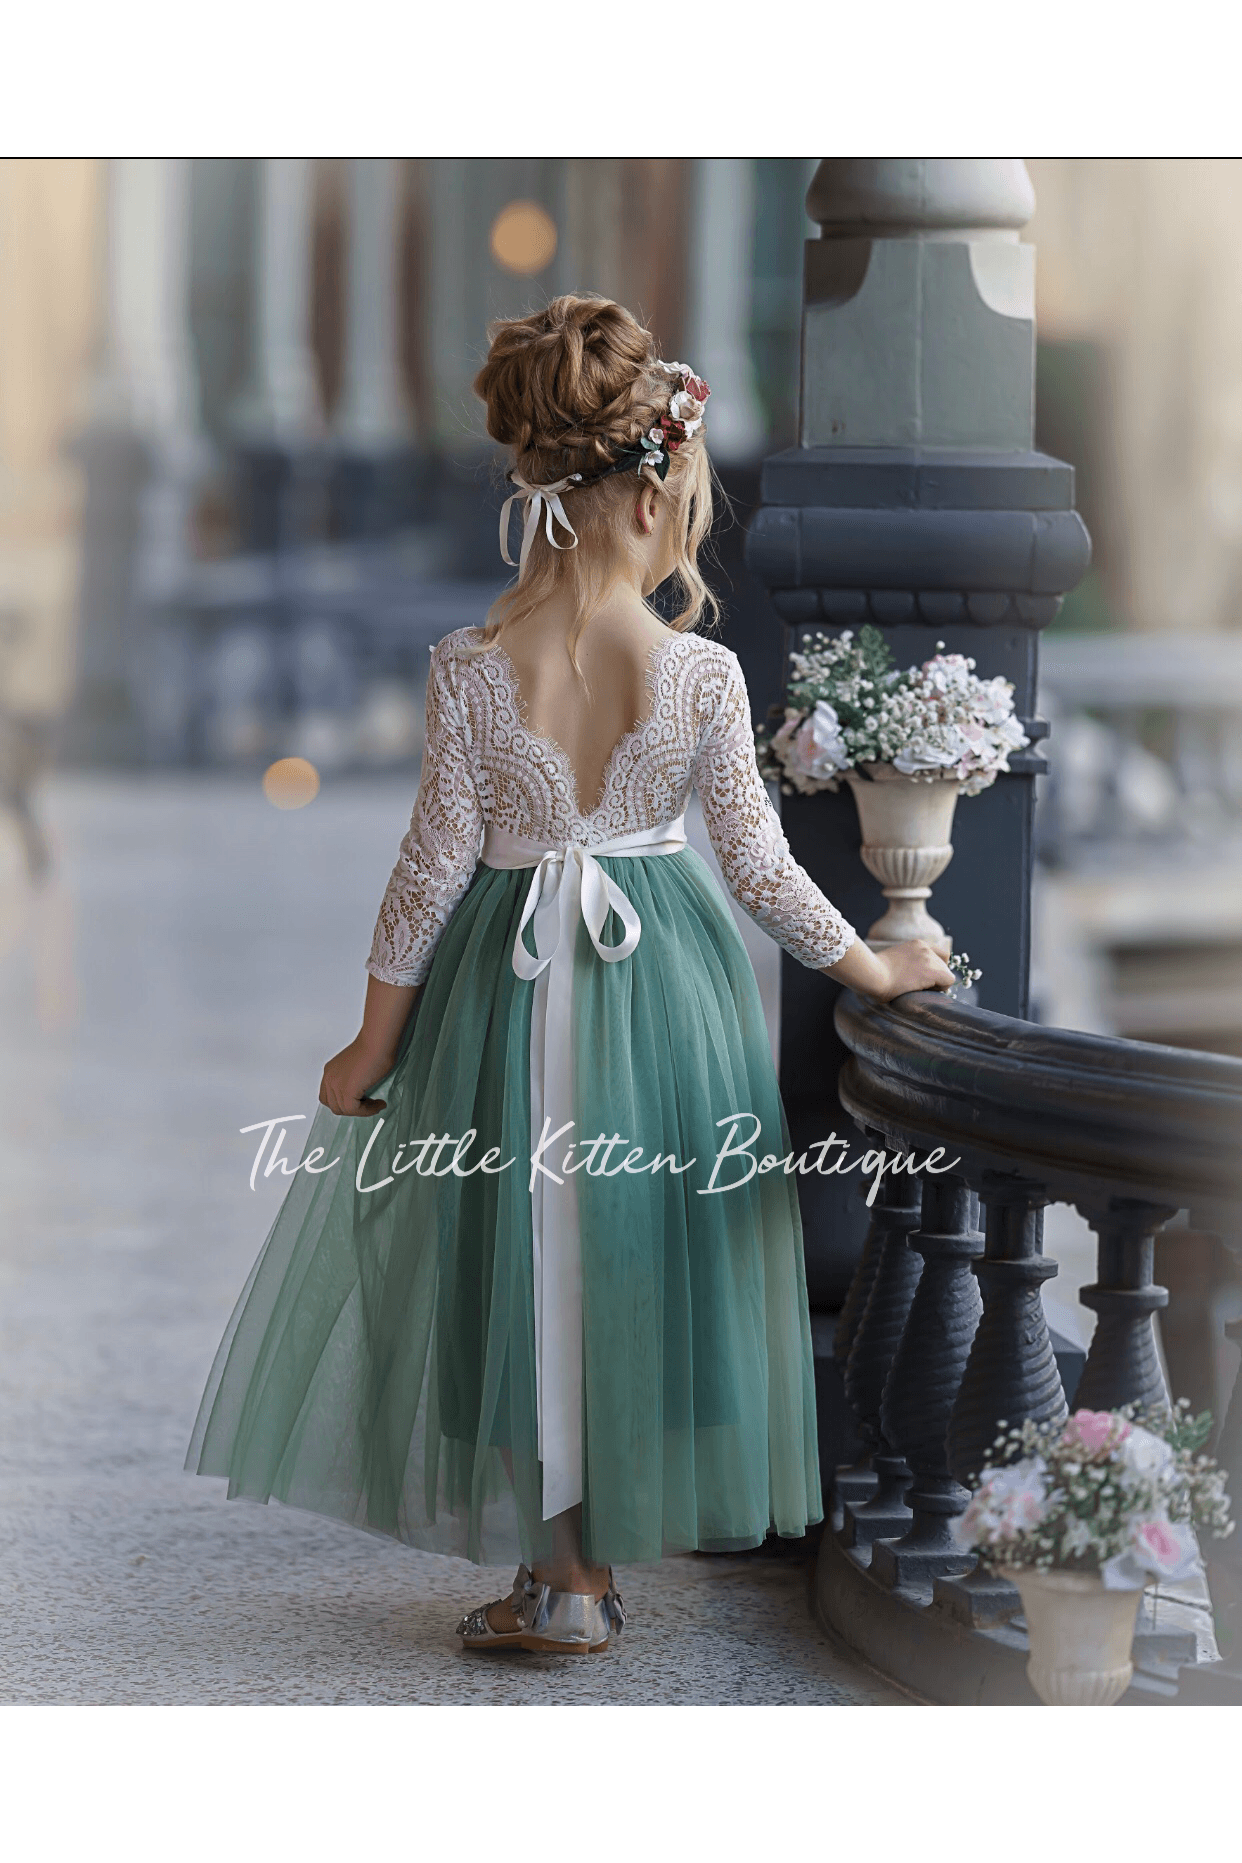 Dusty Blue and Sage Green tulle and lace Flower Girl dress - The Little Kitten Boutique